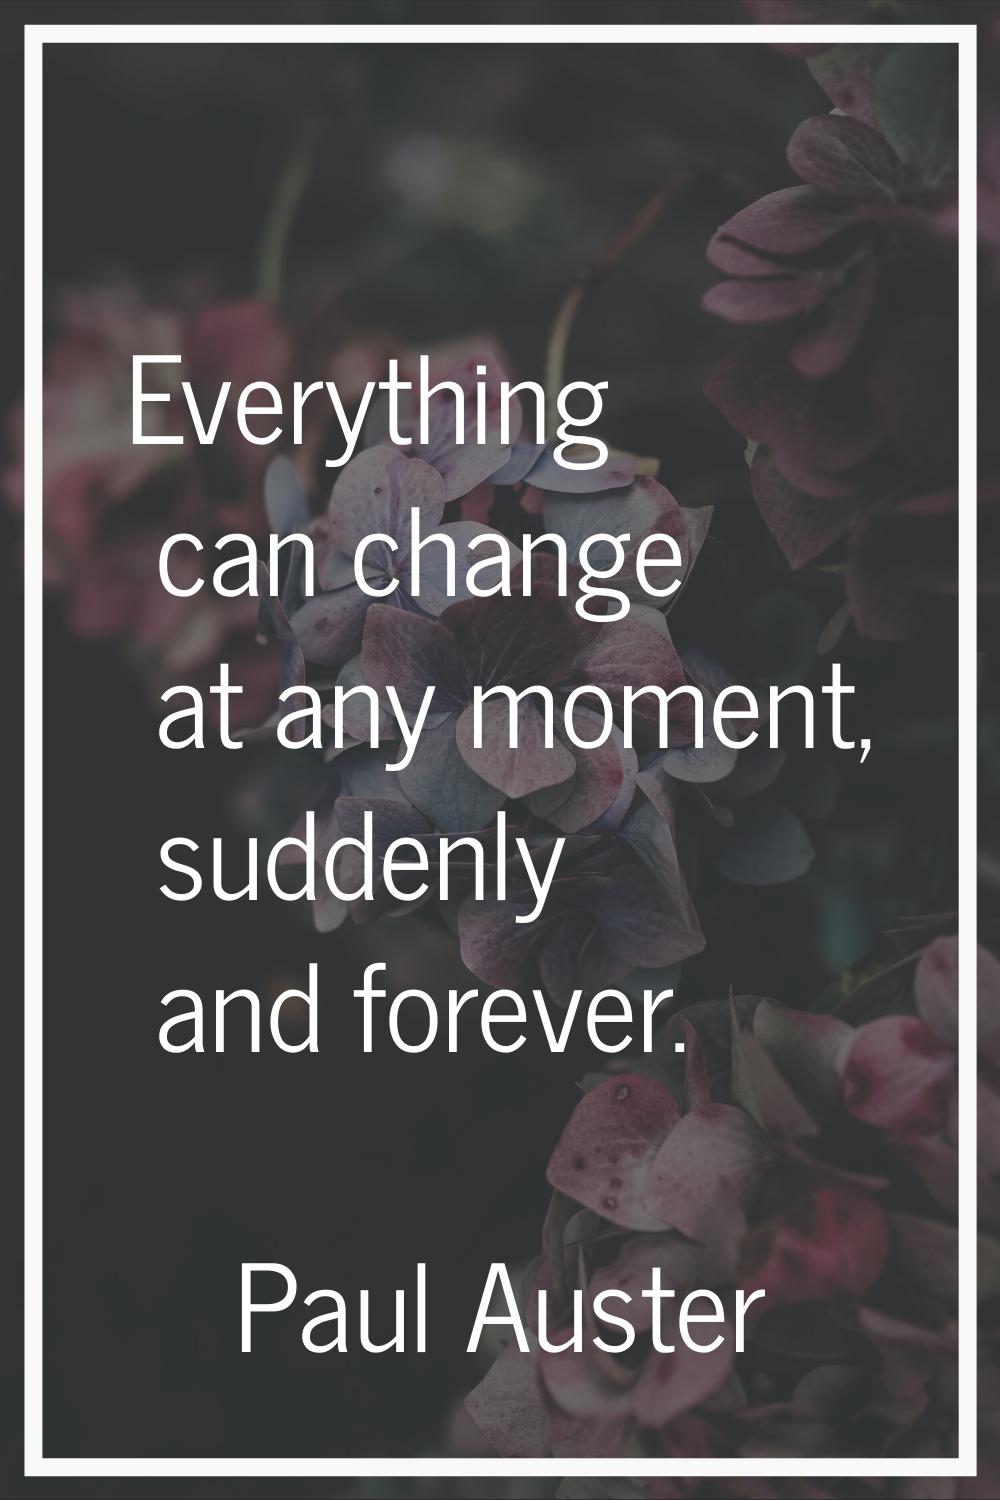 Everything can change at any moment, suddenly and forever.